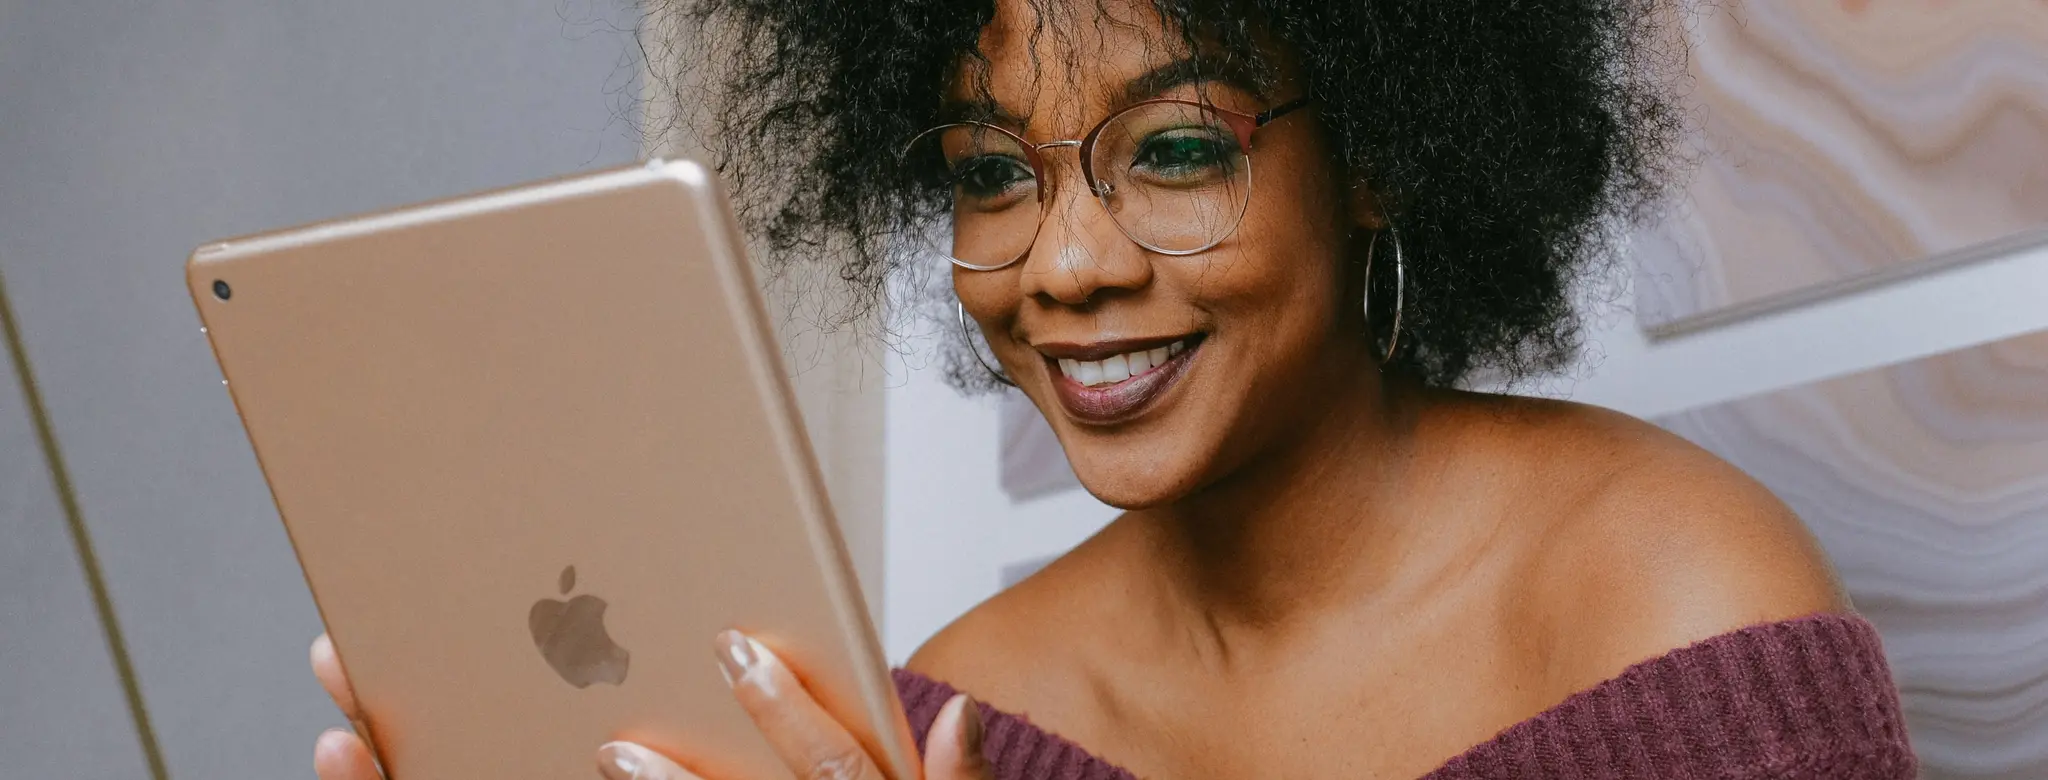 Woman smiling and working on an iPad